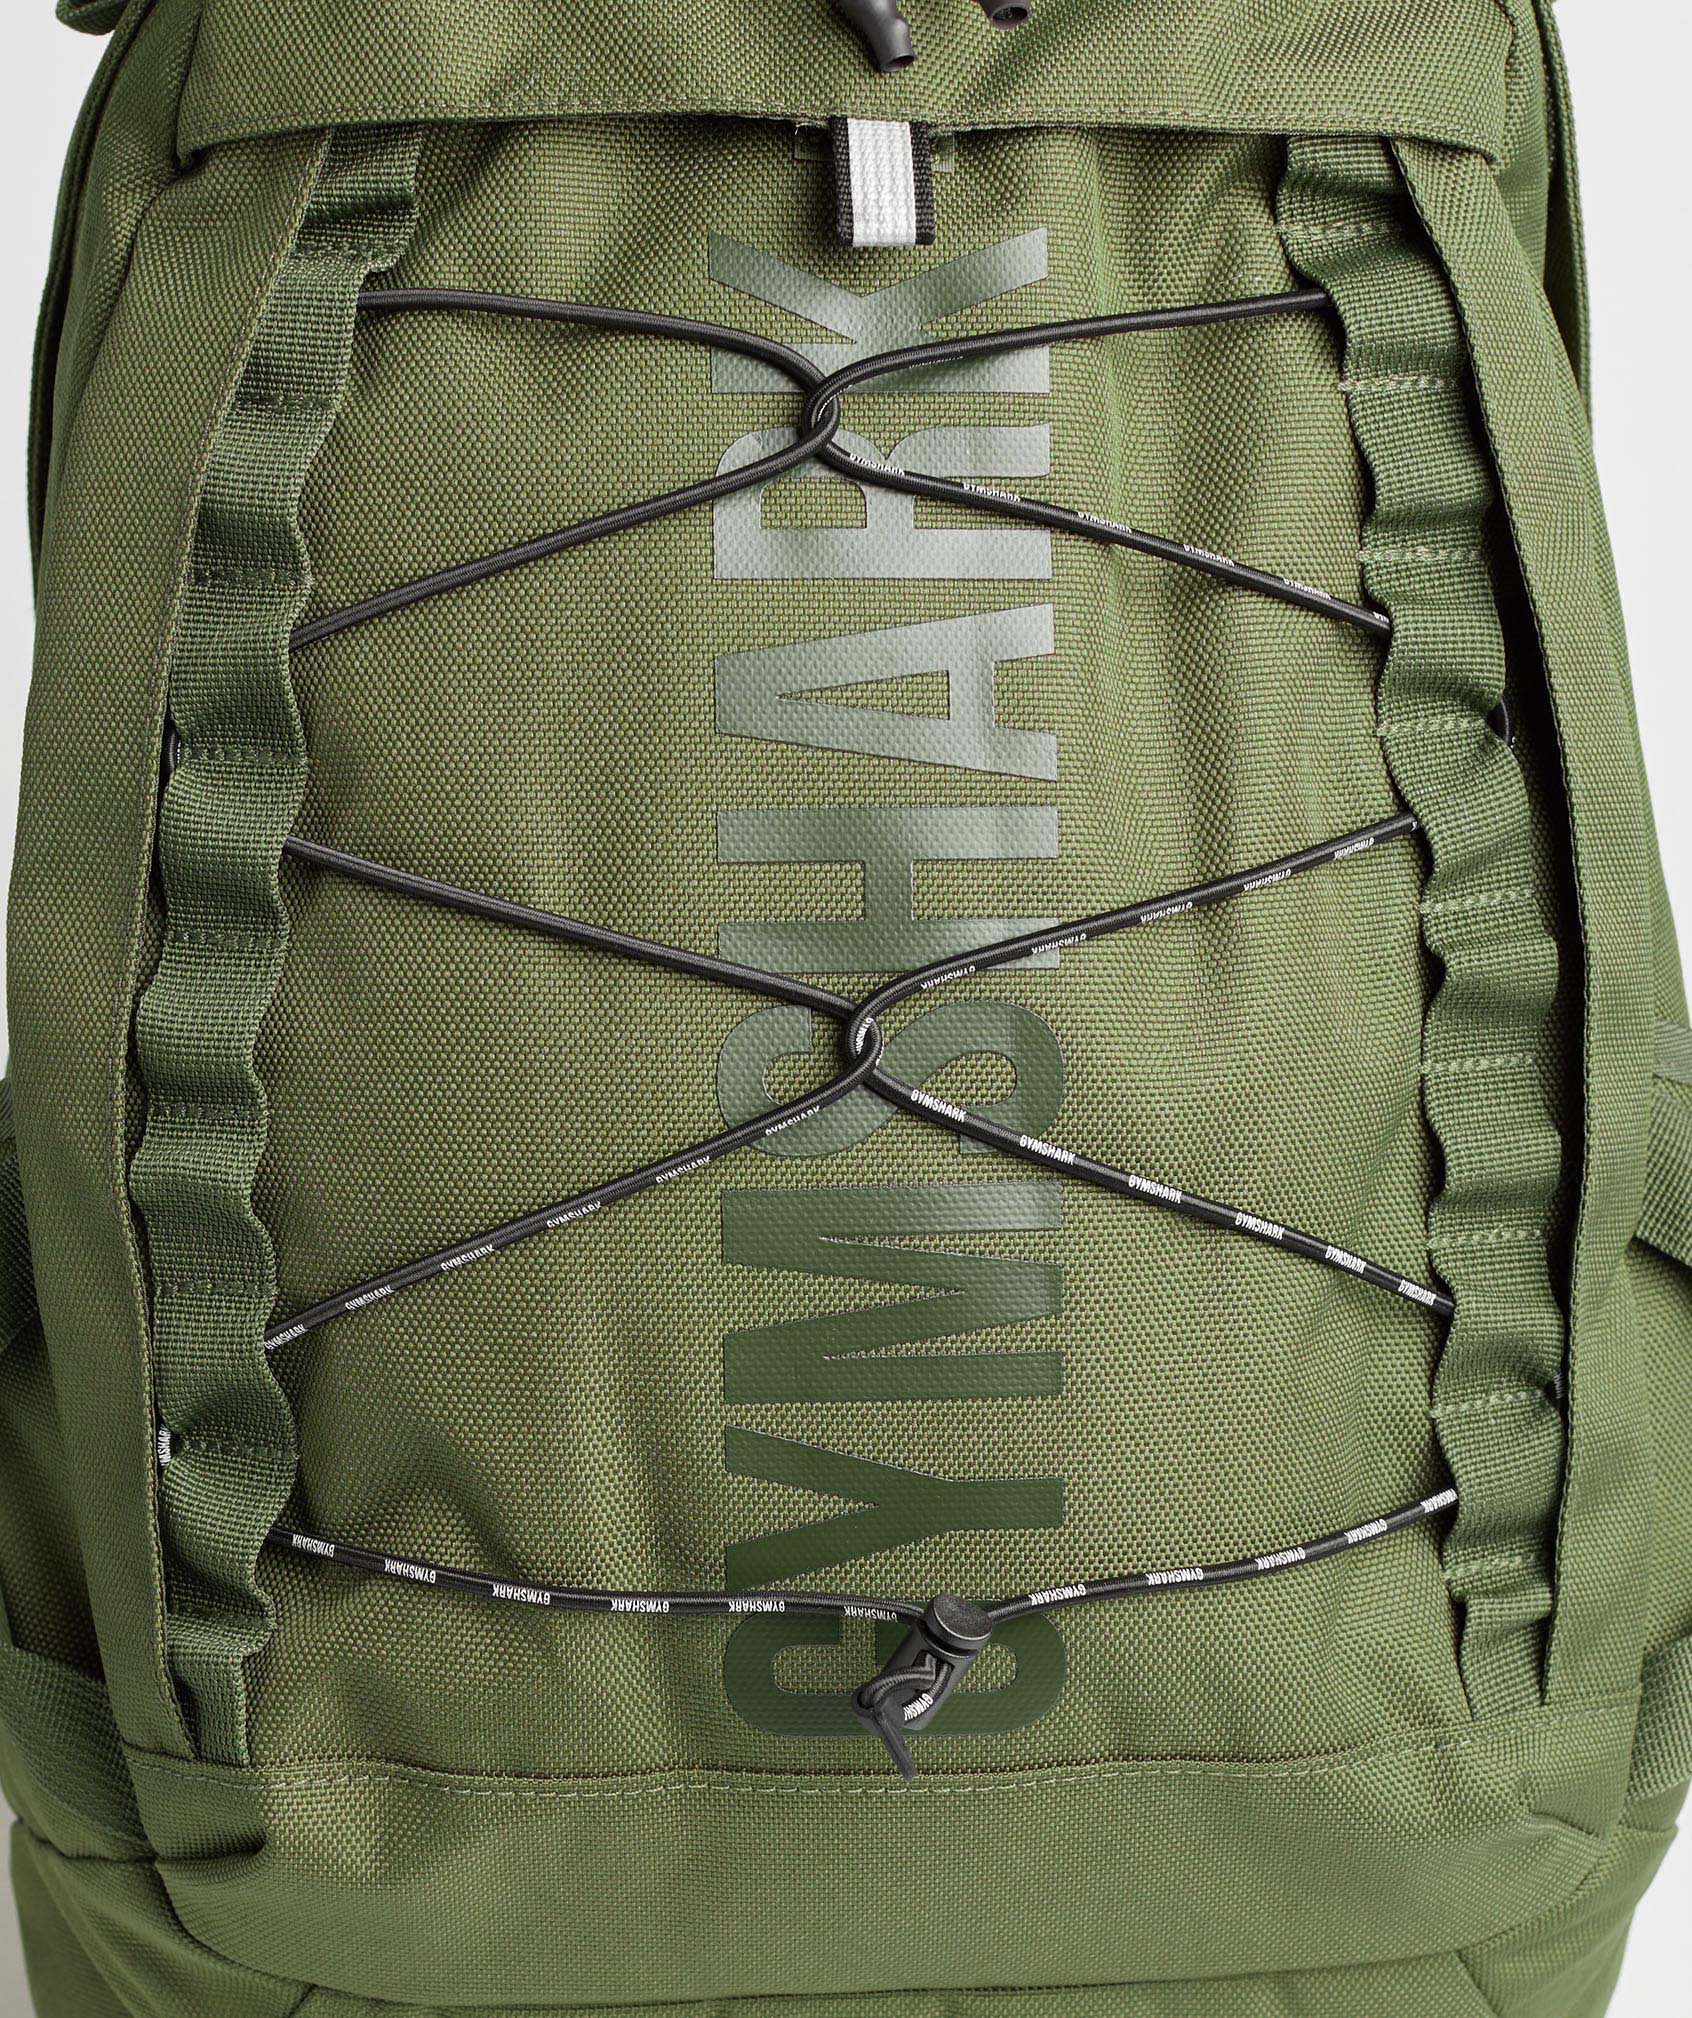 Pursuit Backpack in Green - view 6